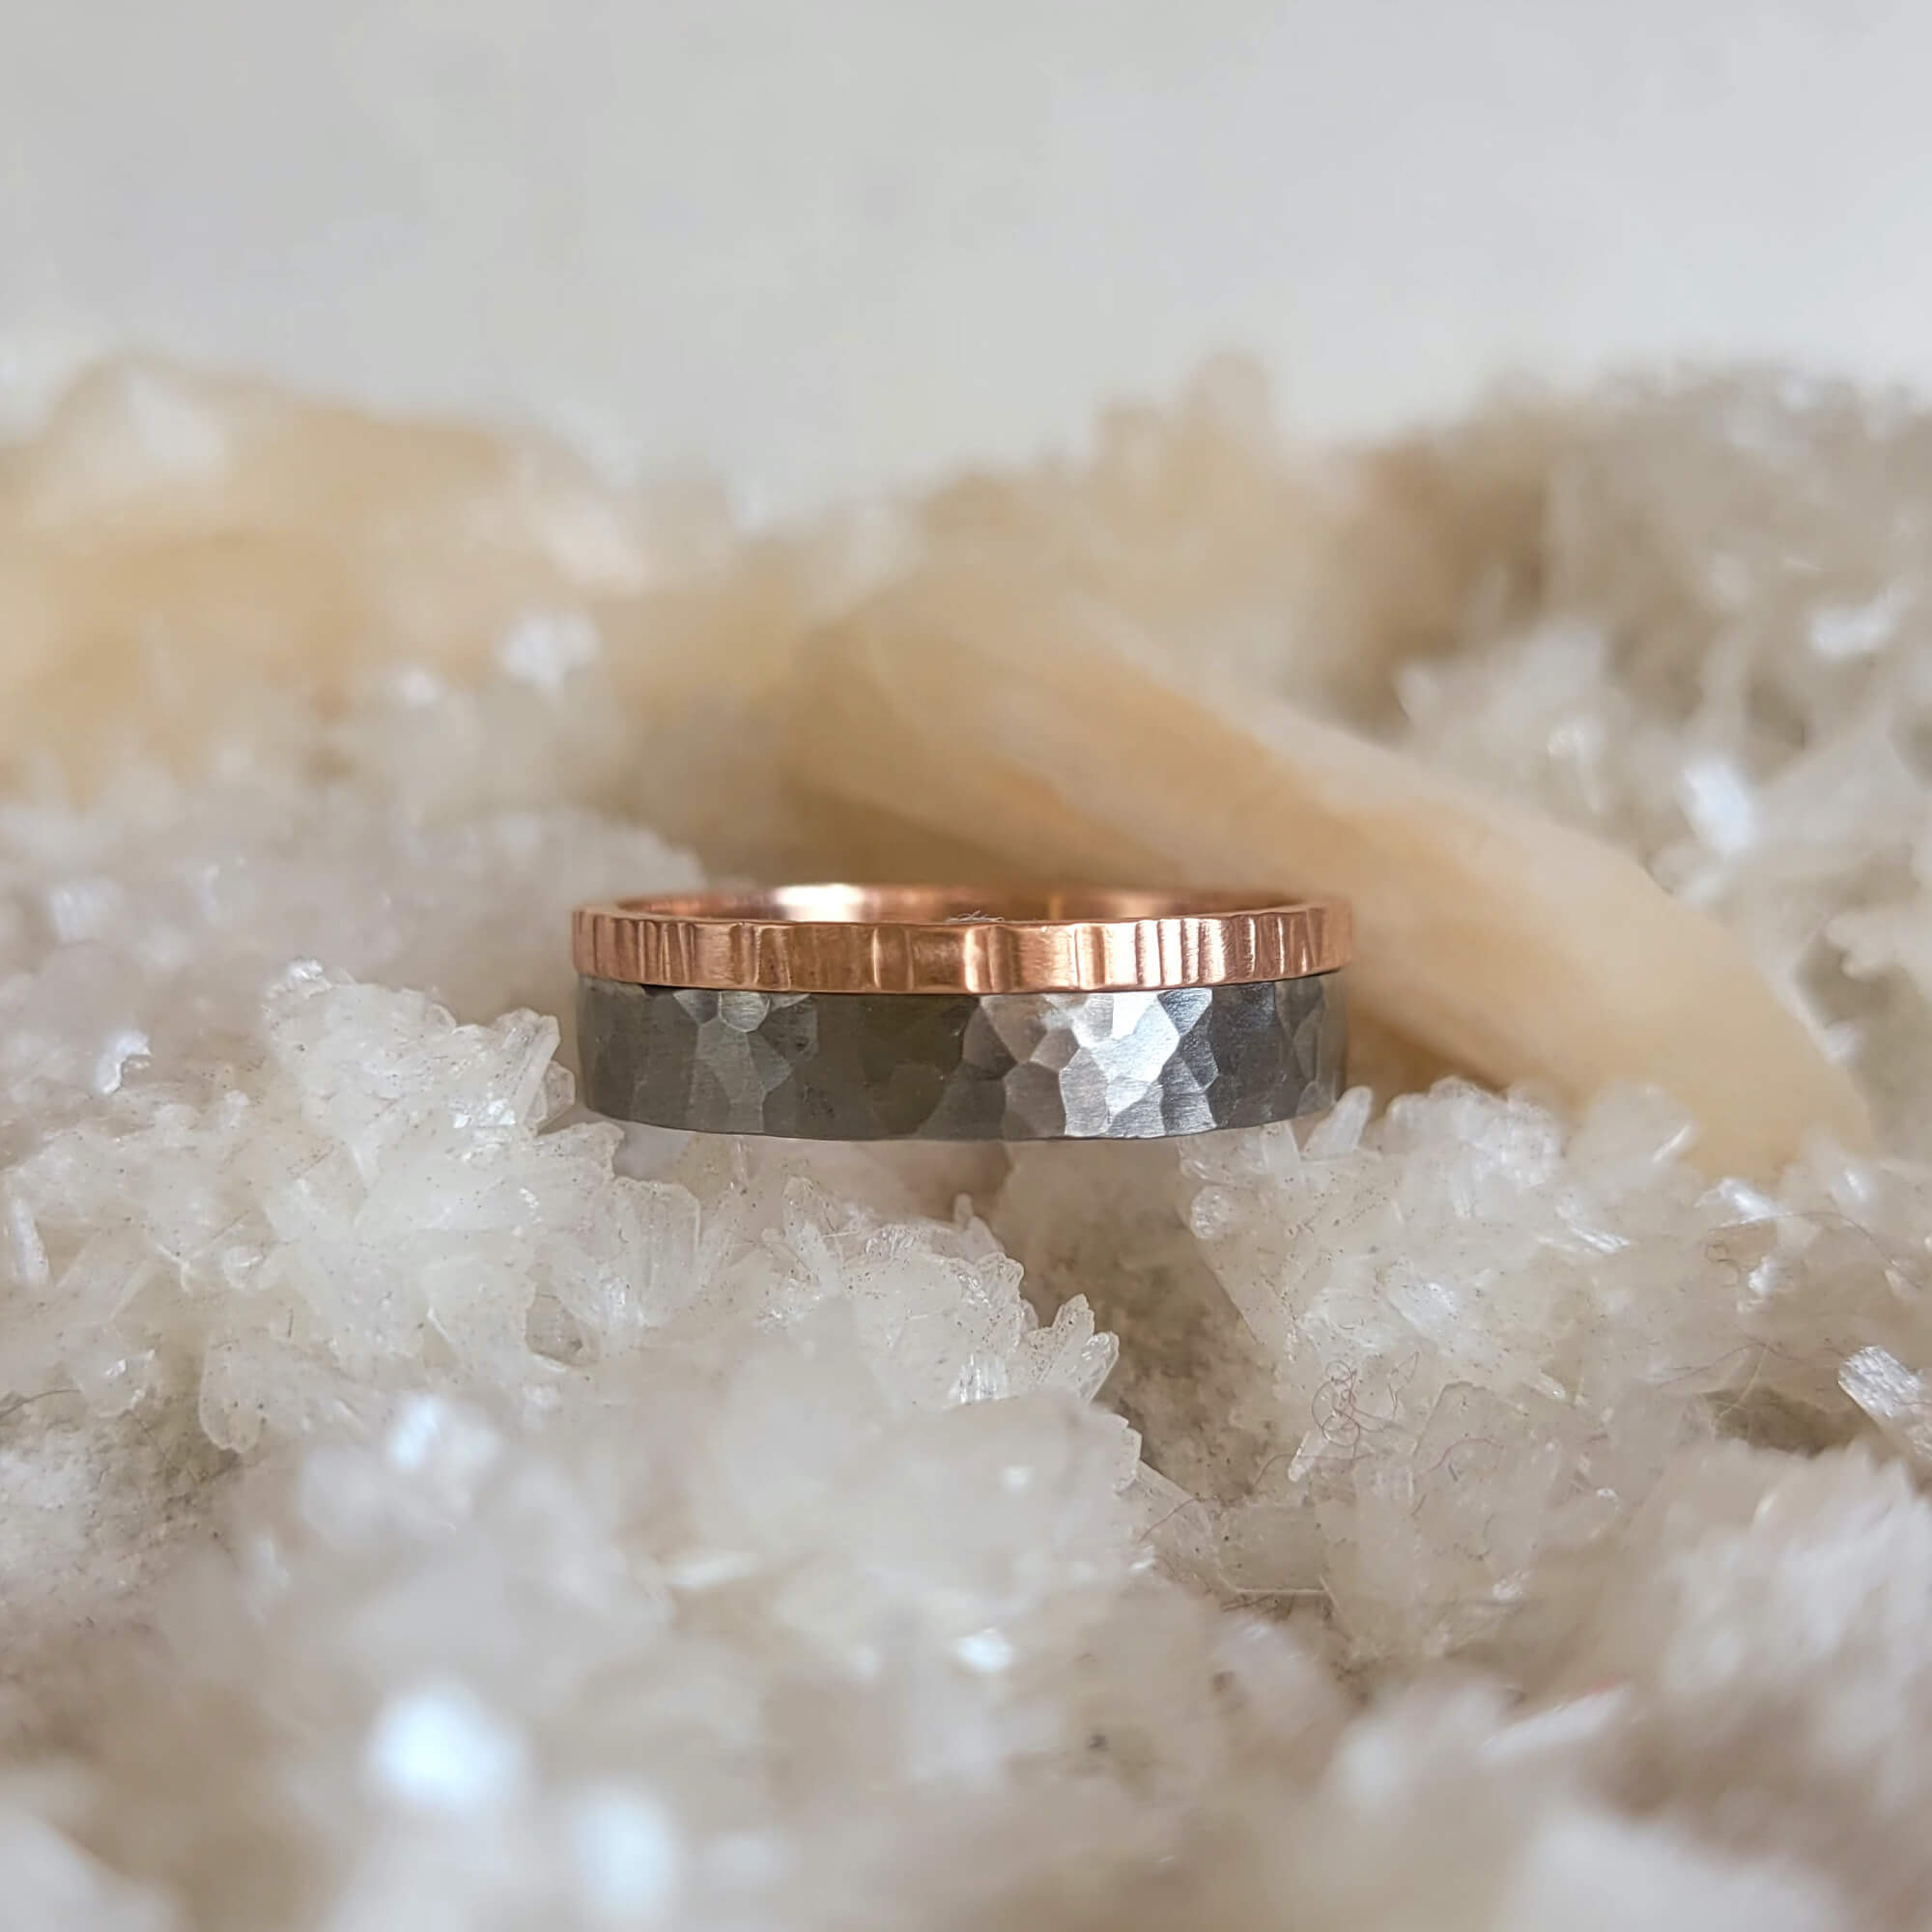 Palladium and rose gold wedding band. Handmade by EC Design Jewelry using recycled metal.